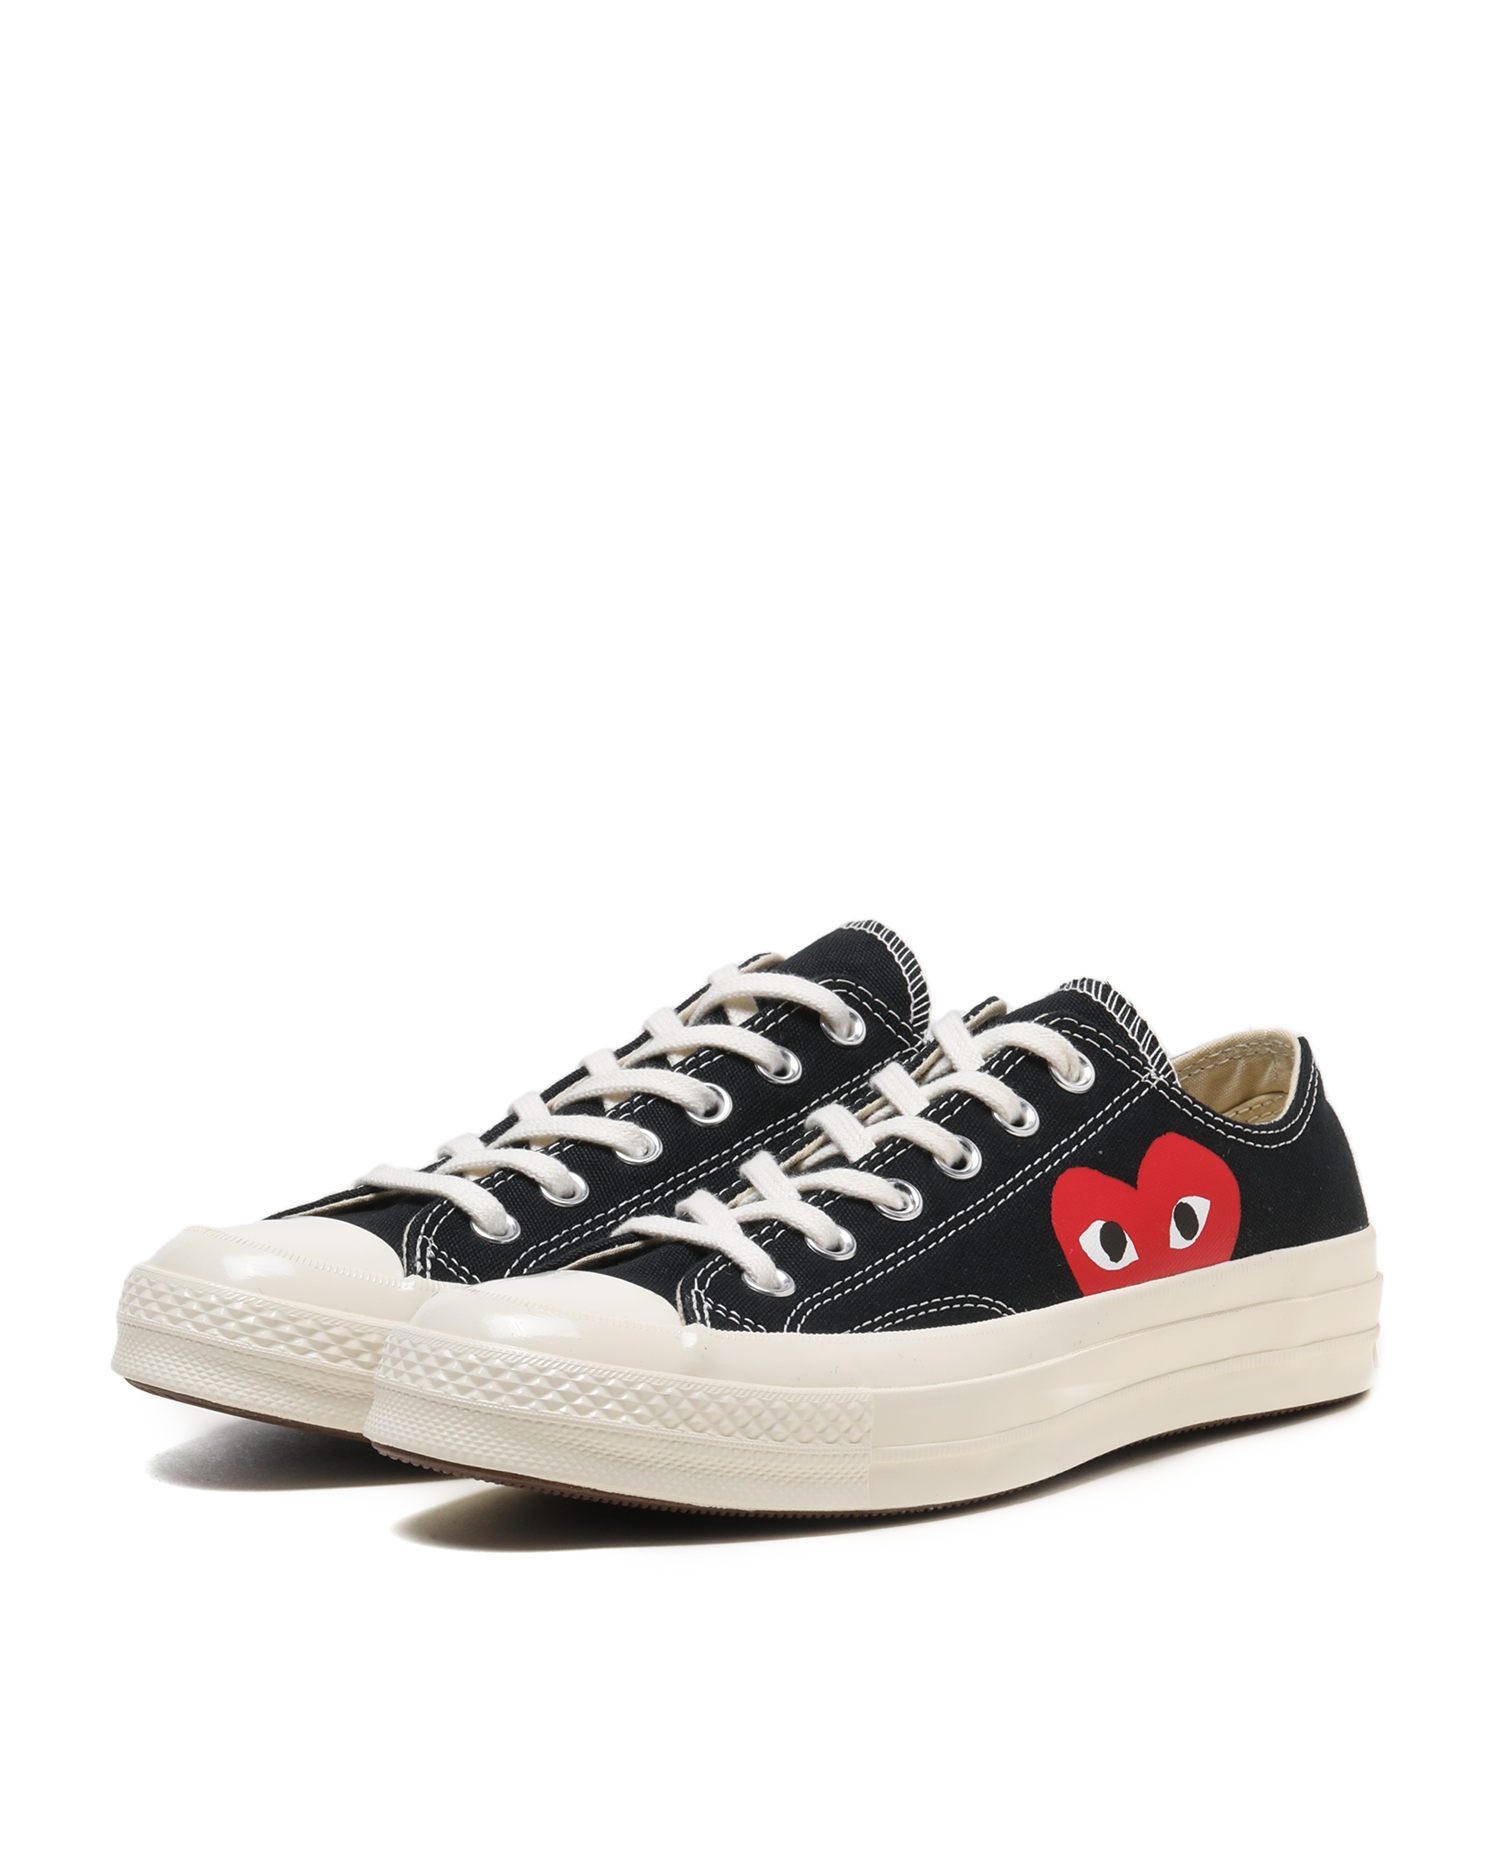 converse cdg shoes